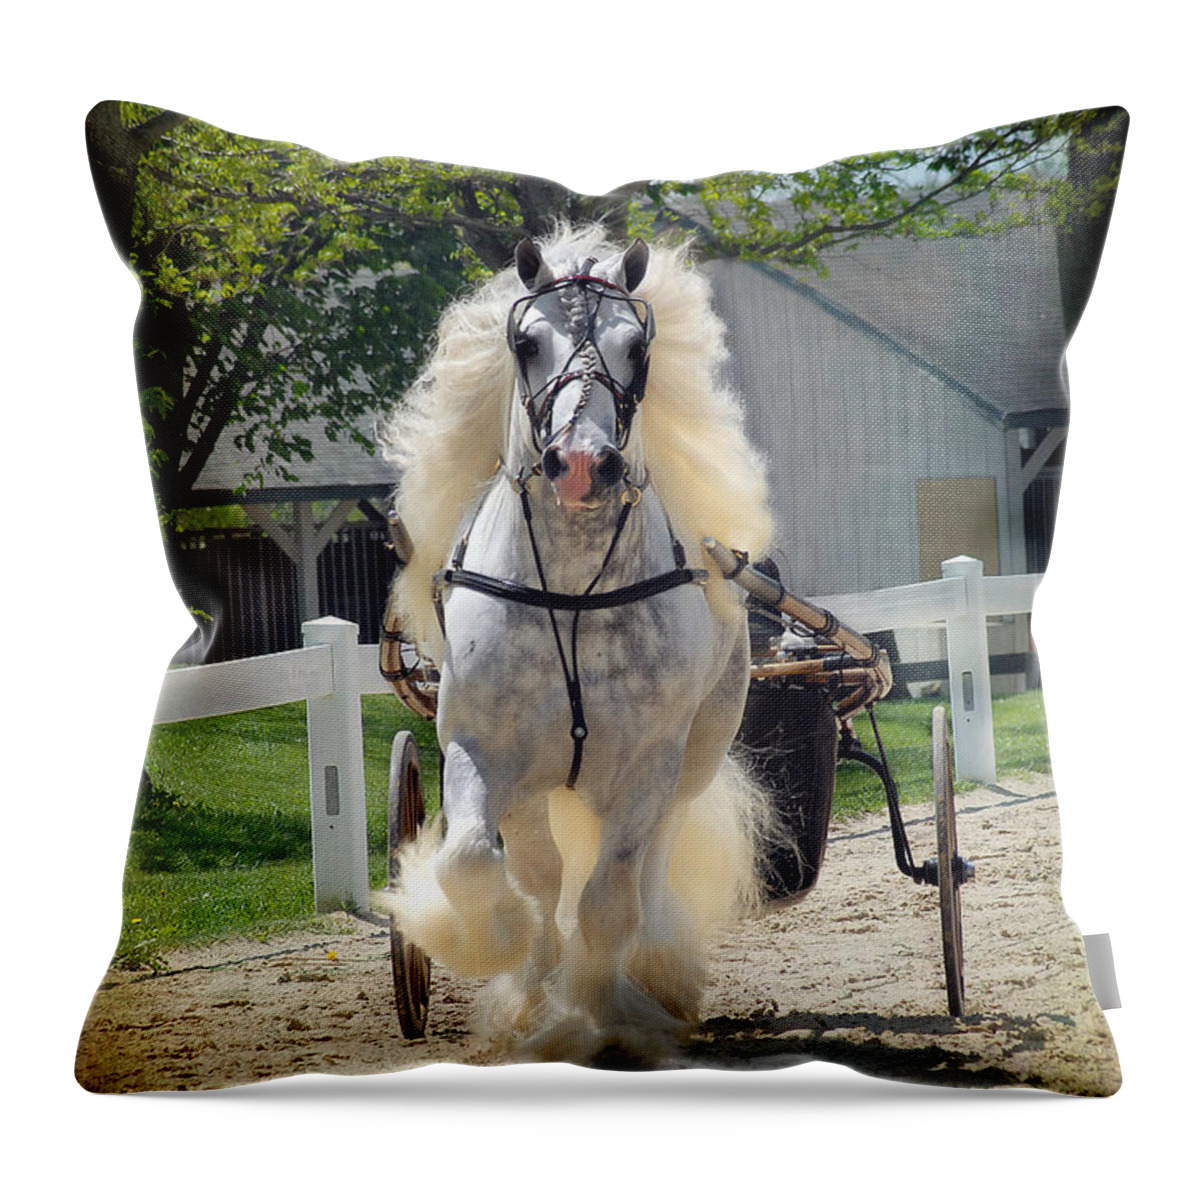 Horses Throw Pillow featuring the photograph Dunbrody Drive by Fran J Scott